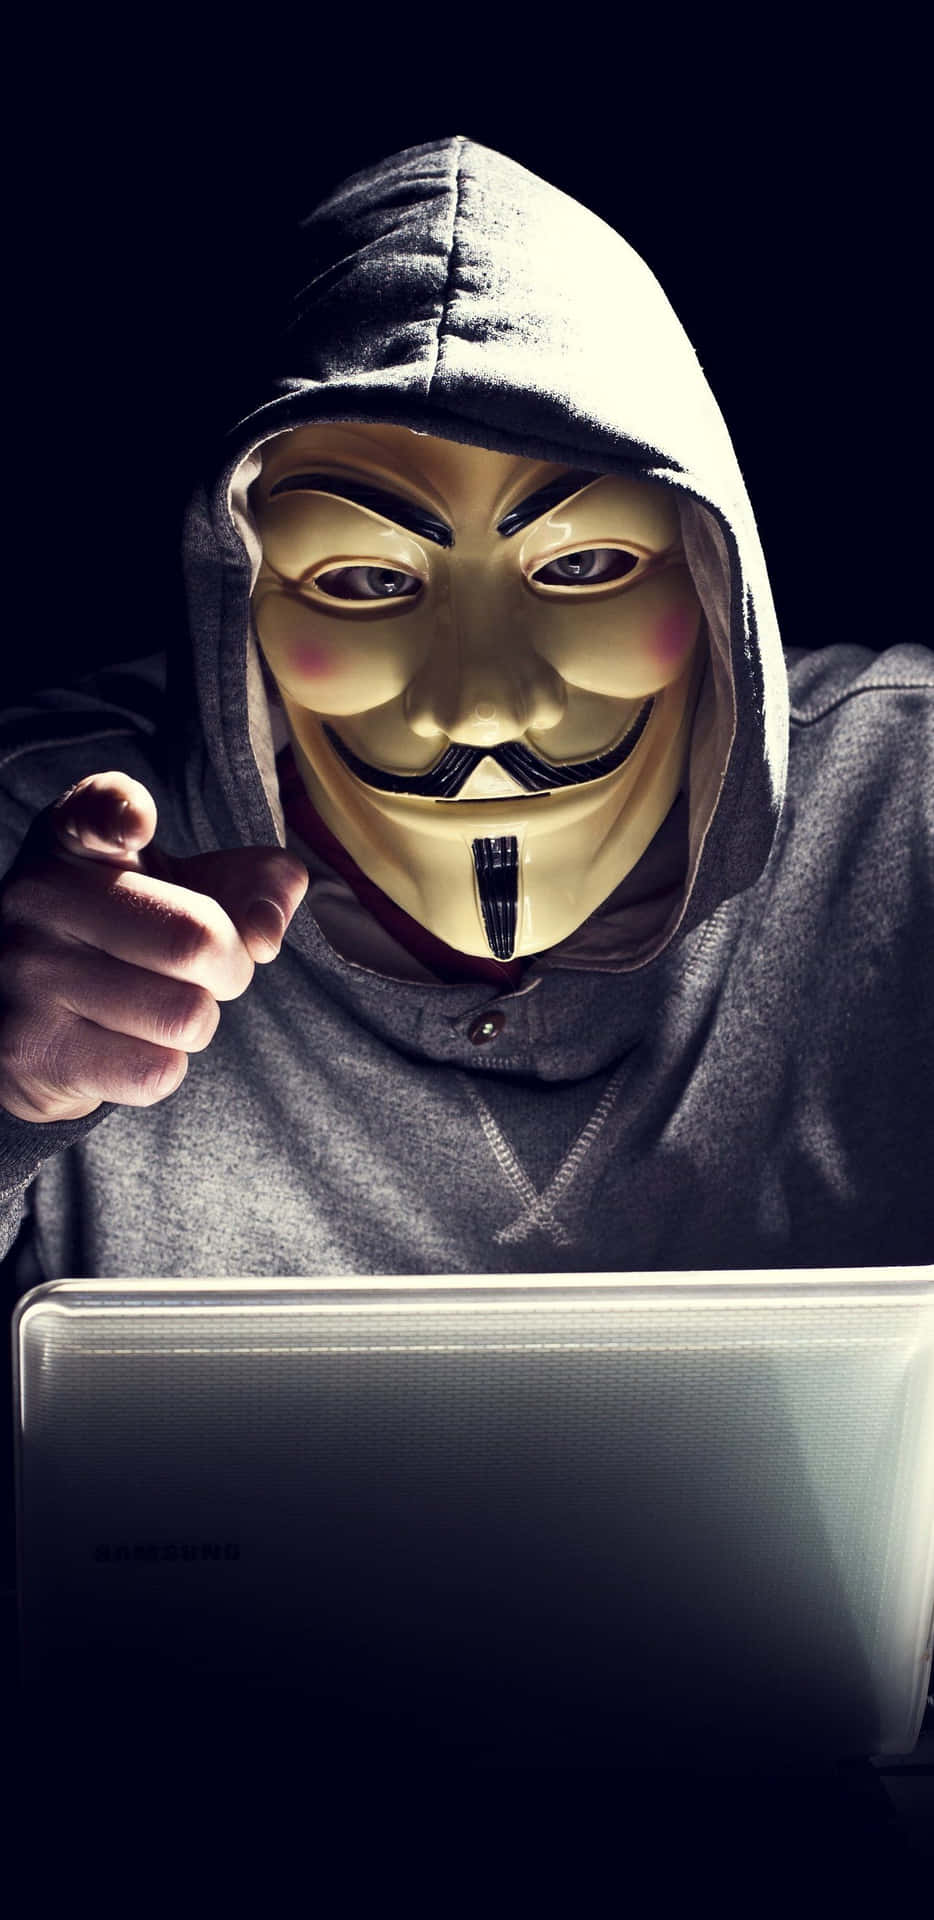 A Man In A Mask Is Using A Laptop